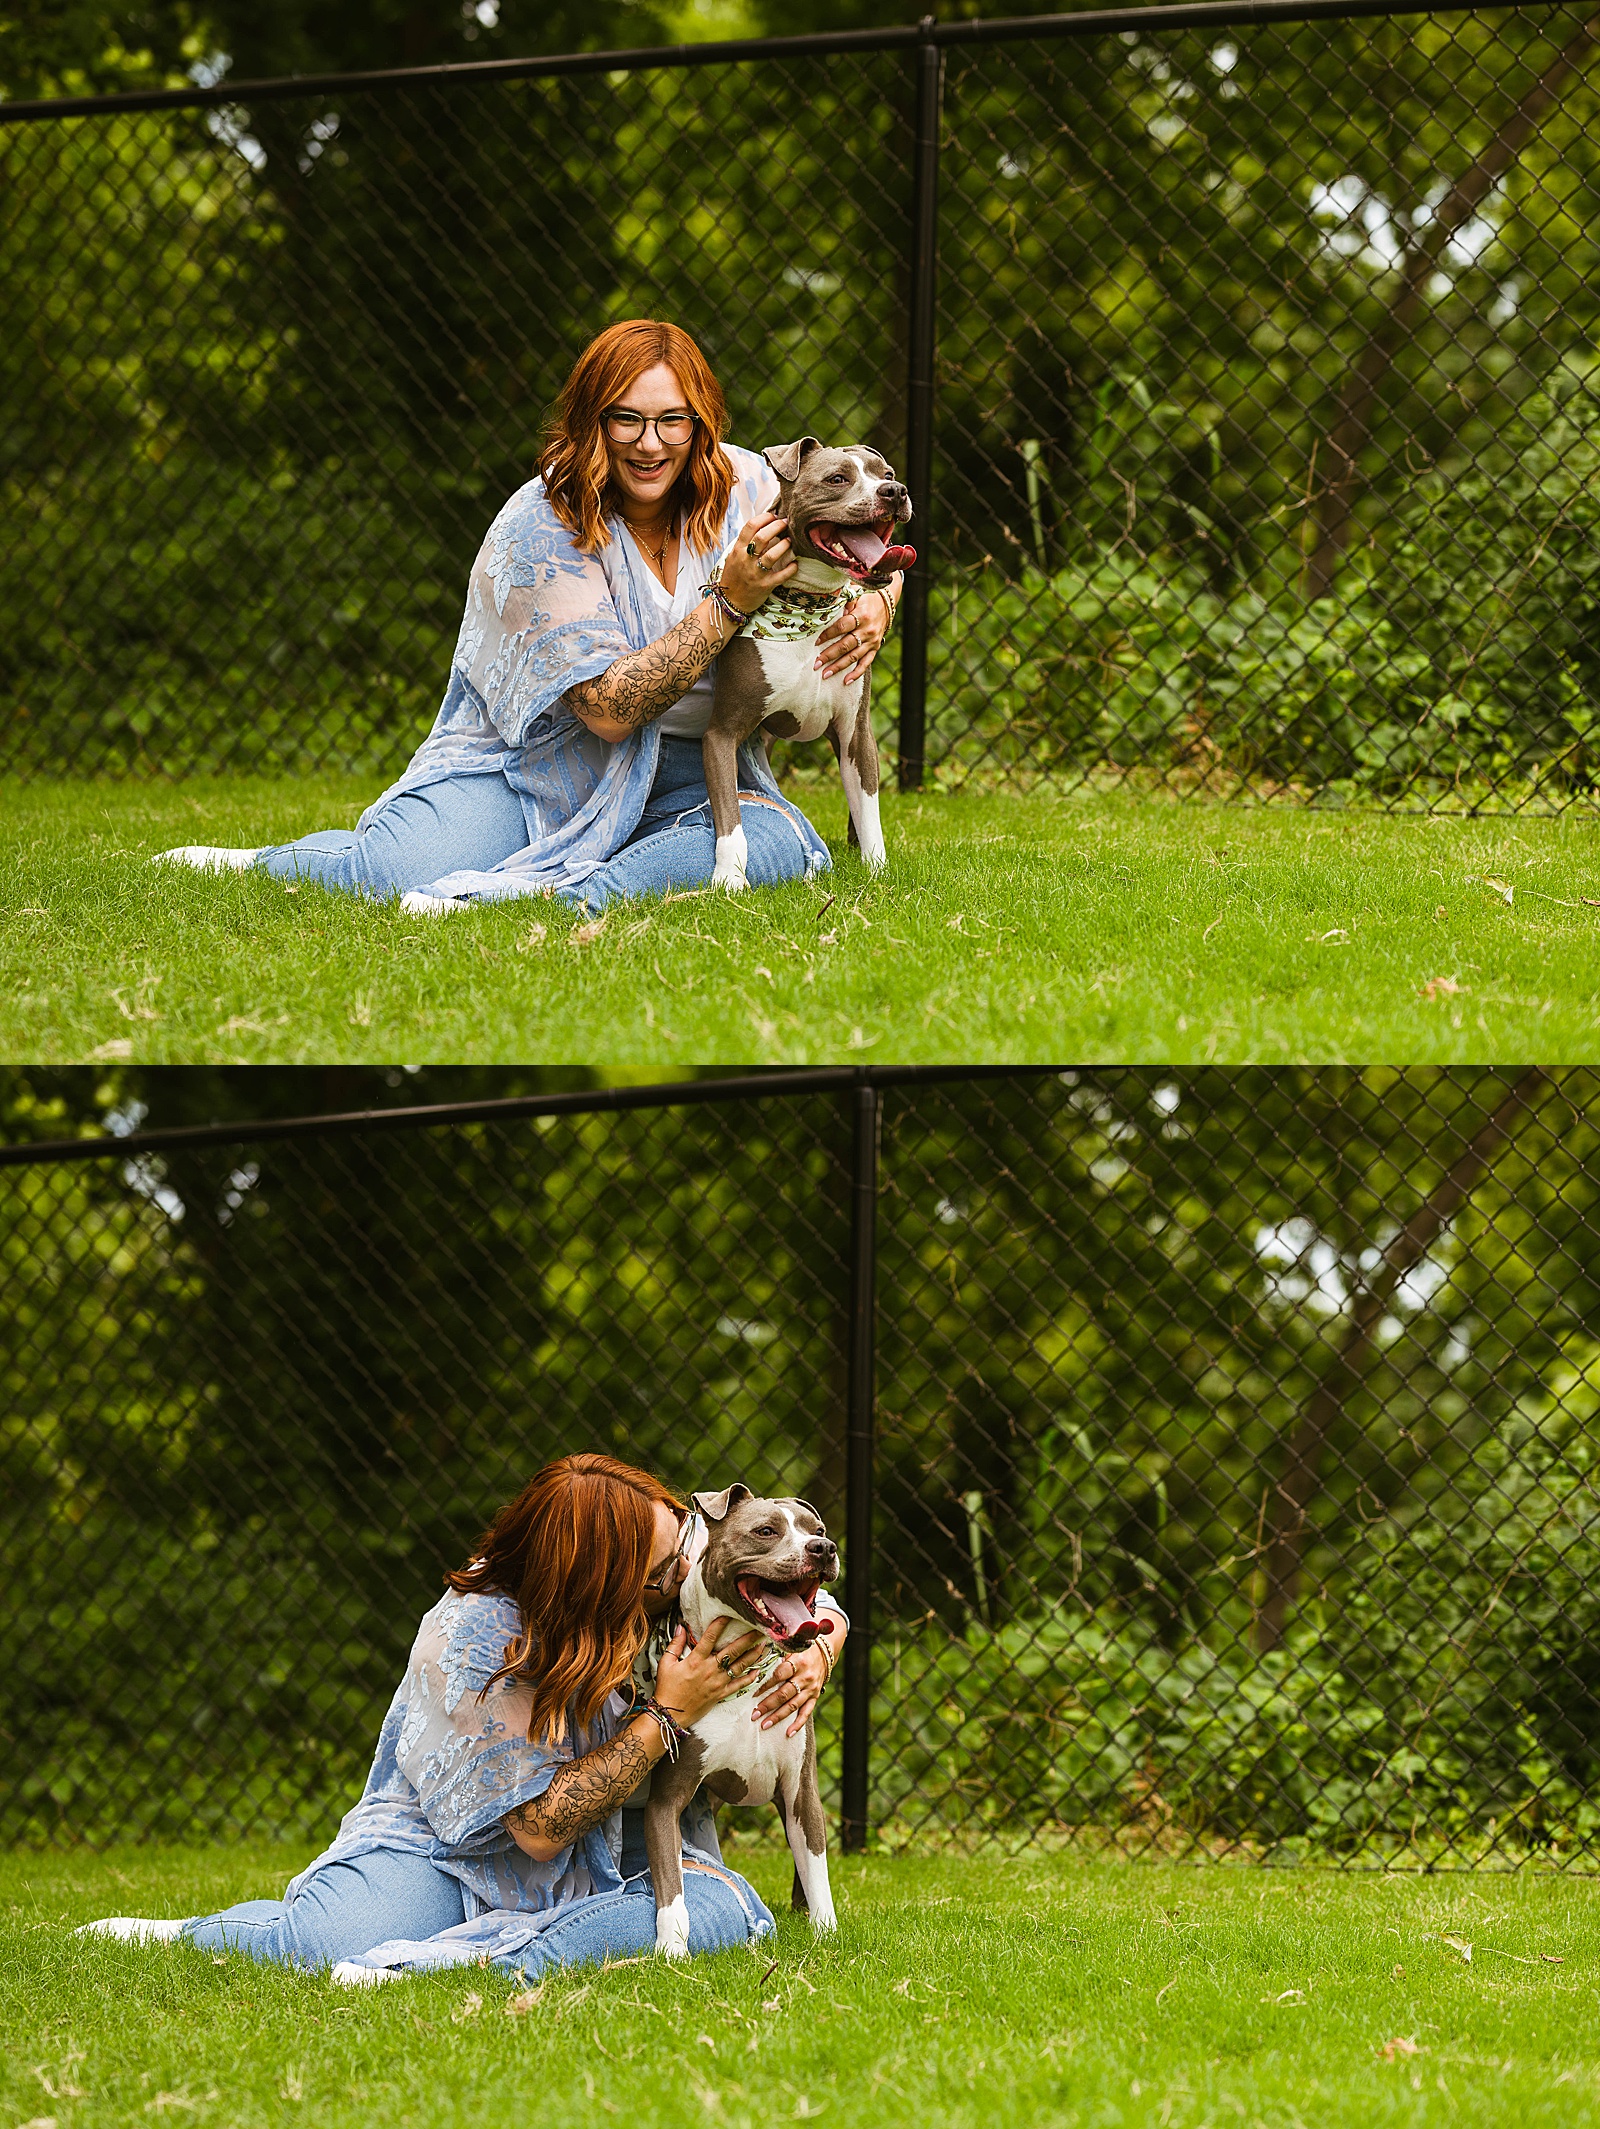 Redhead in blue playing with dogs photo shoot with pups